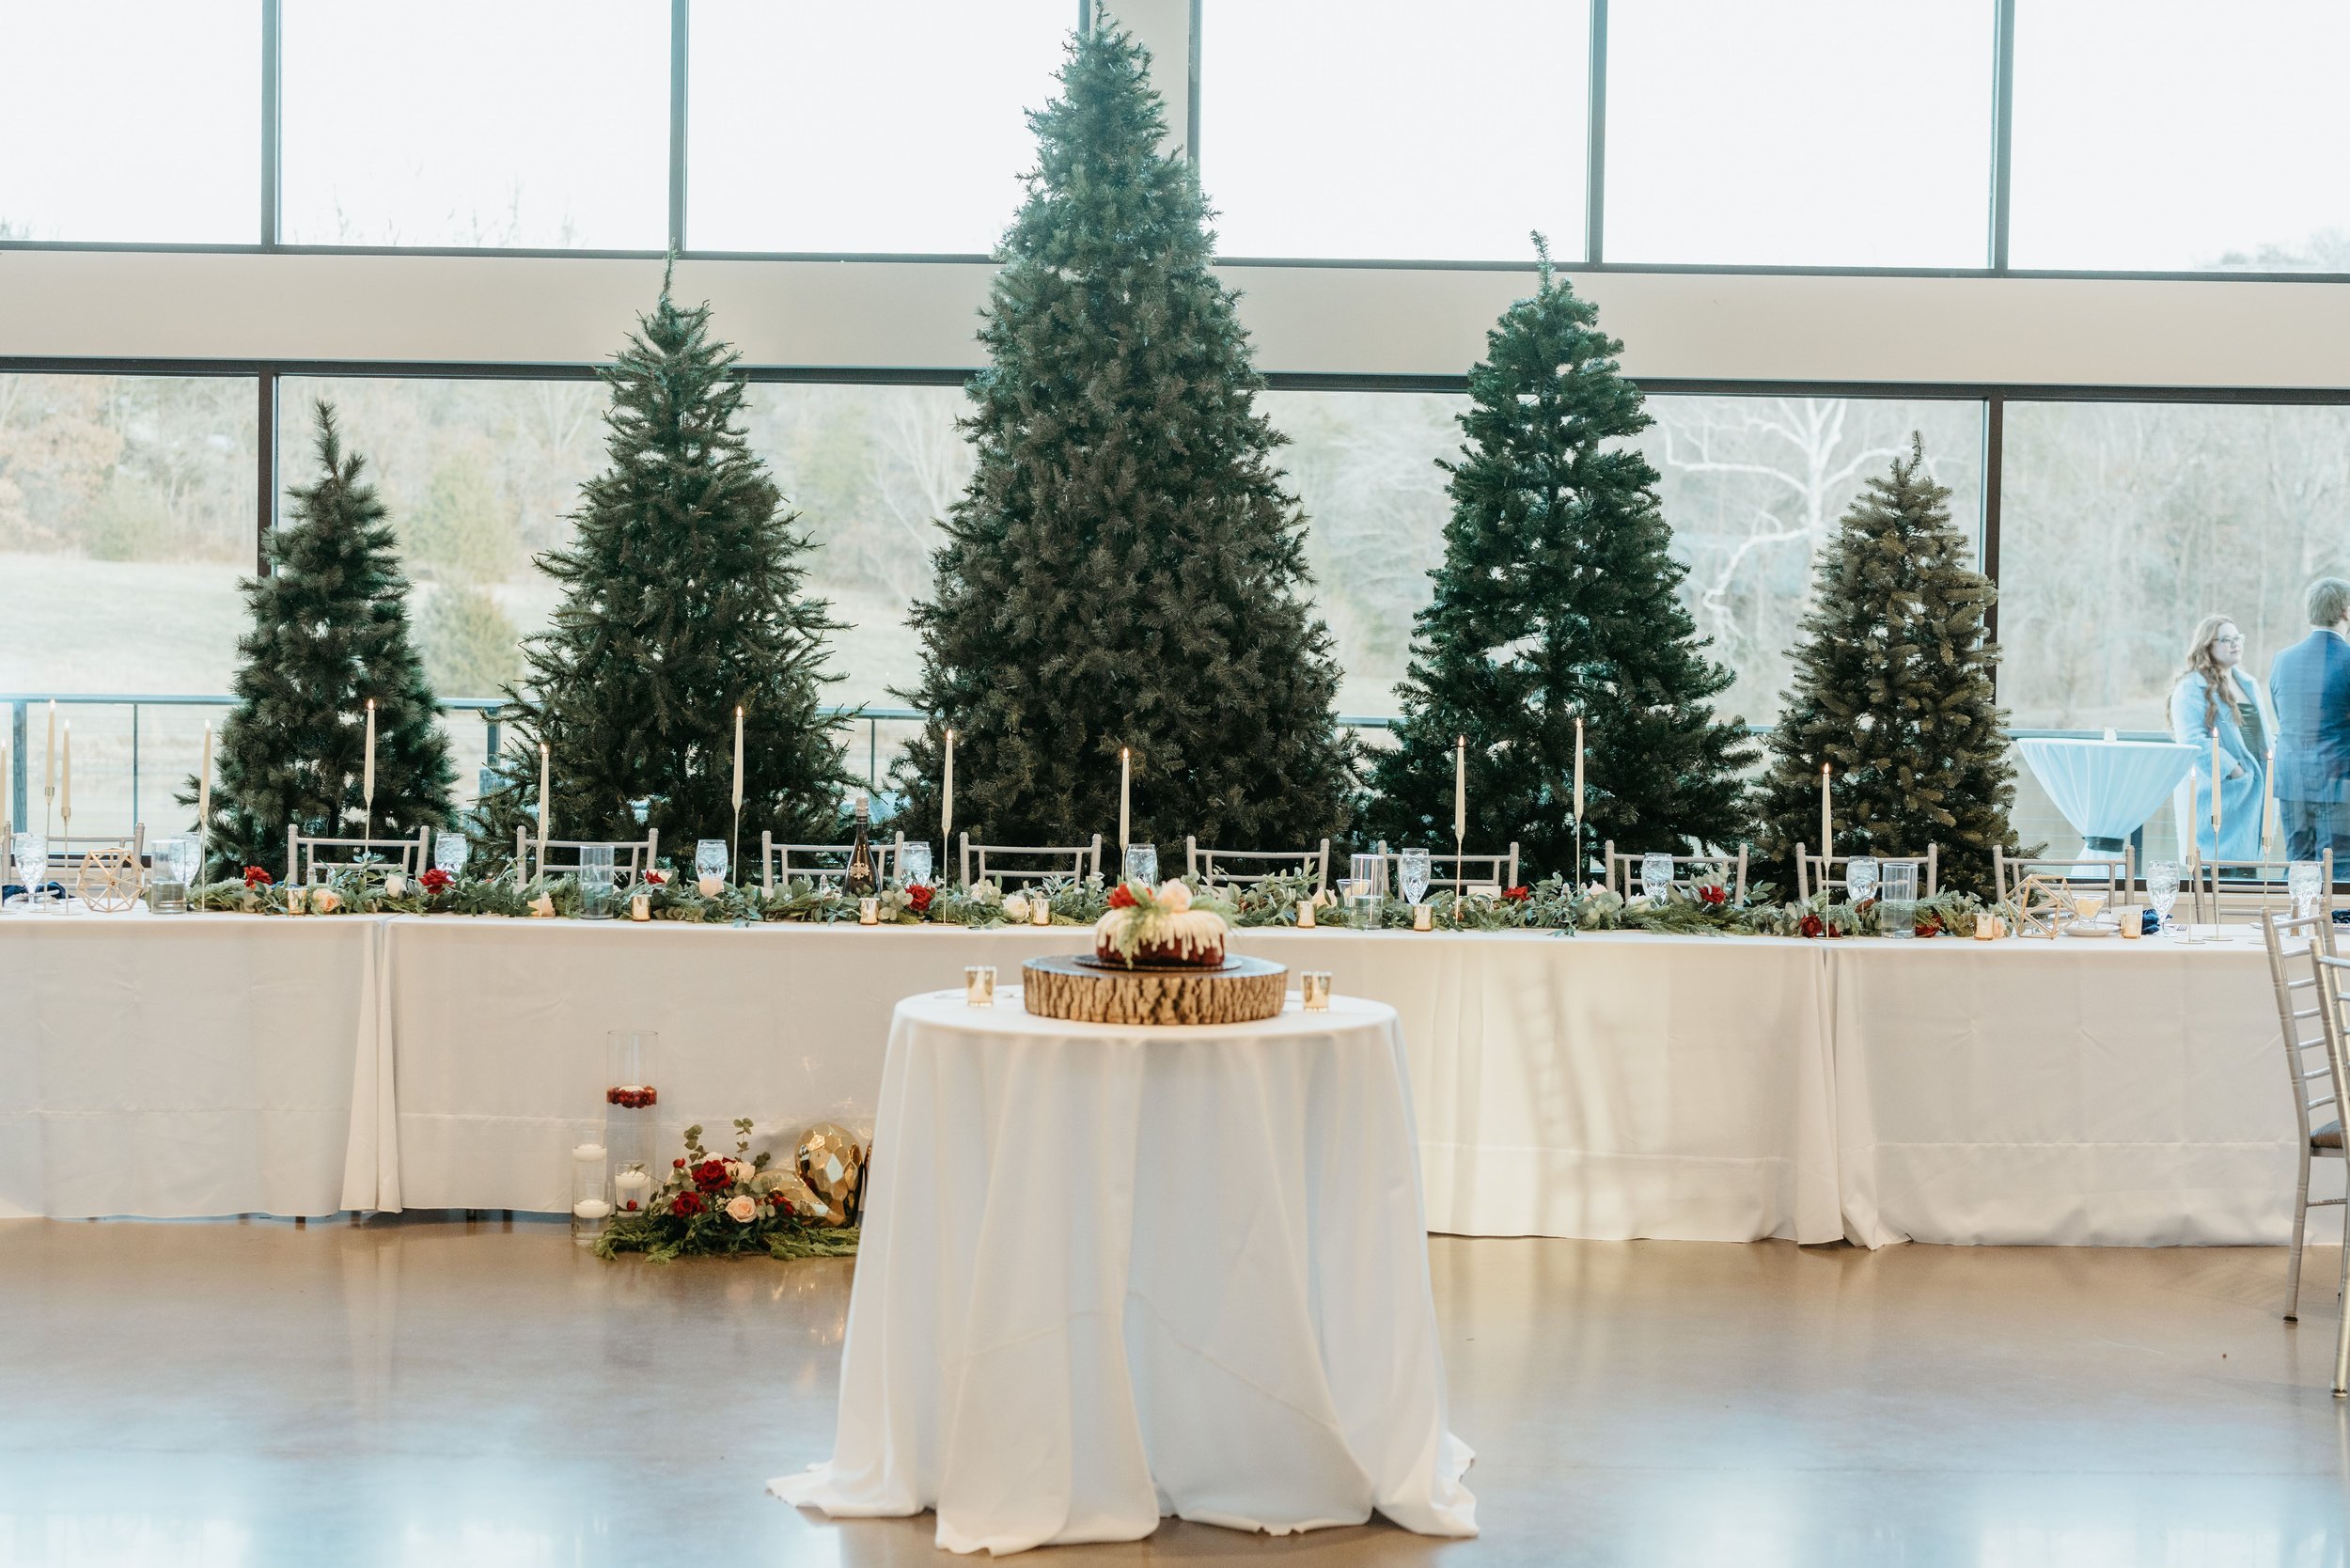 Holiday theme wedding from One foxy affair for a december wedding and photographed by Kate Colton Studios.jpg